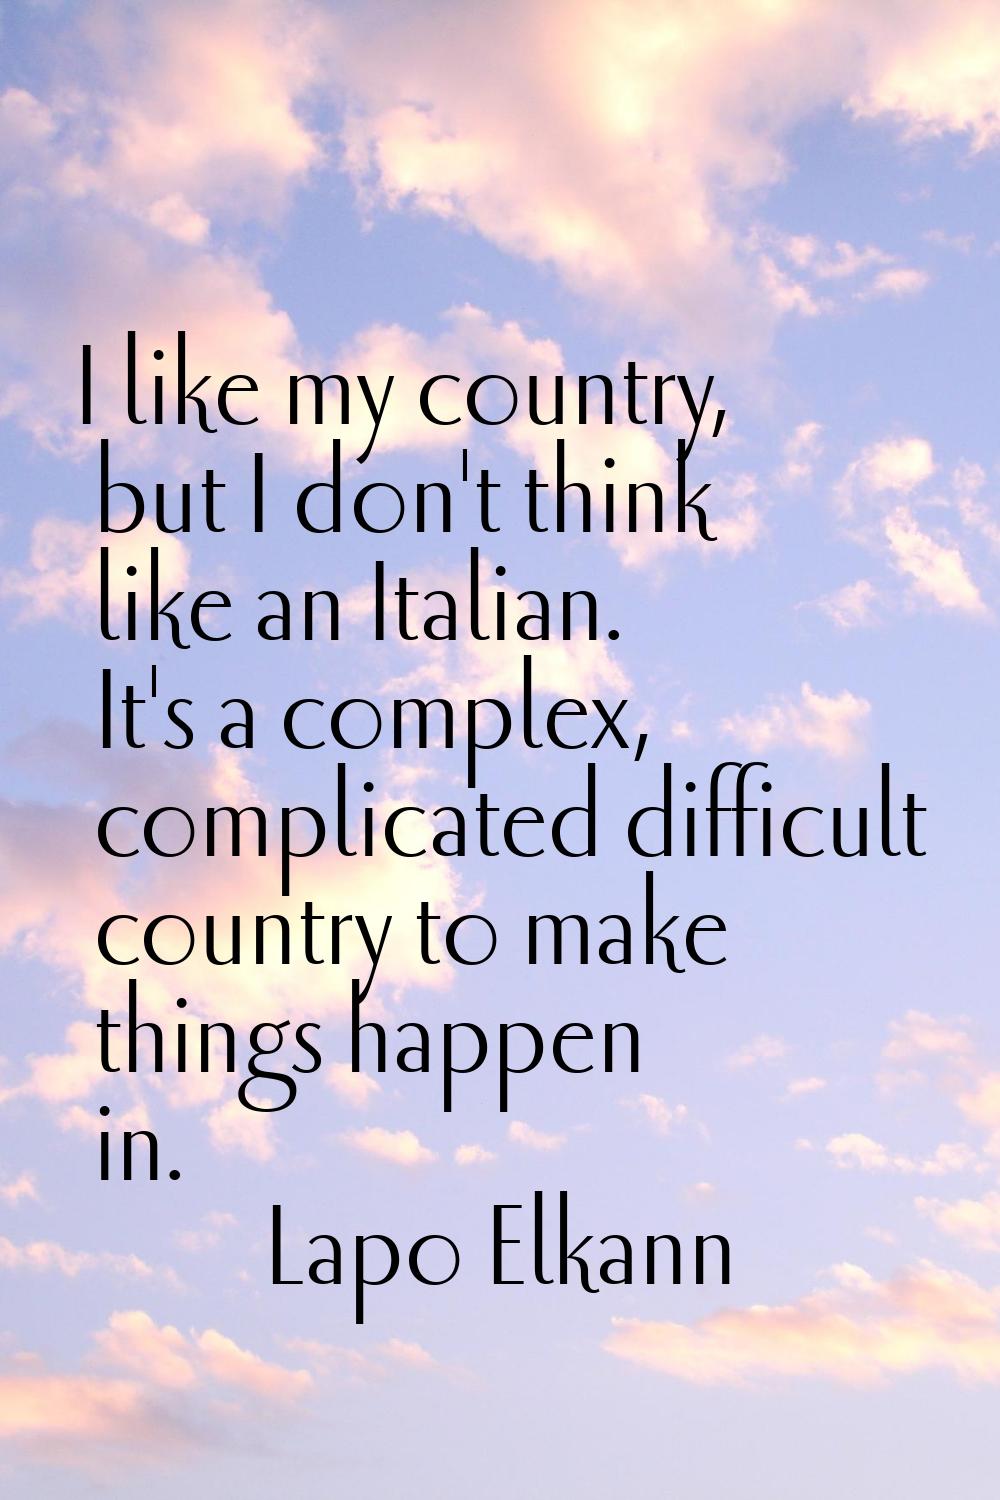 I like my country, but I don't think like an Italian. It's a complex, complicated difficult country